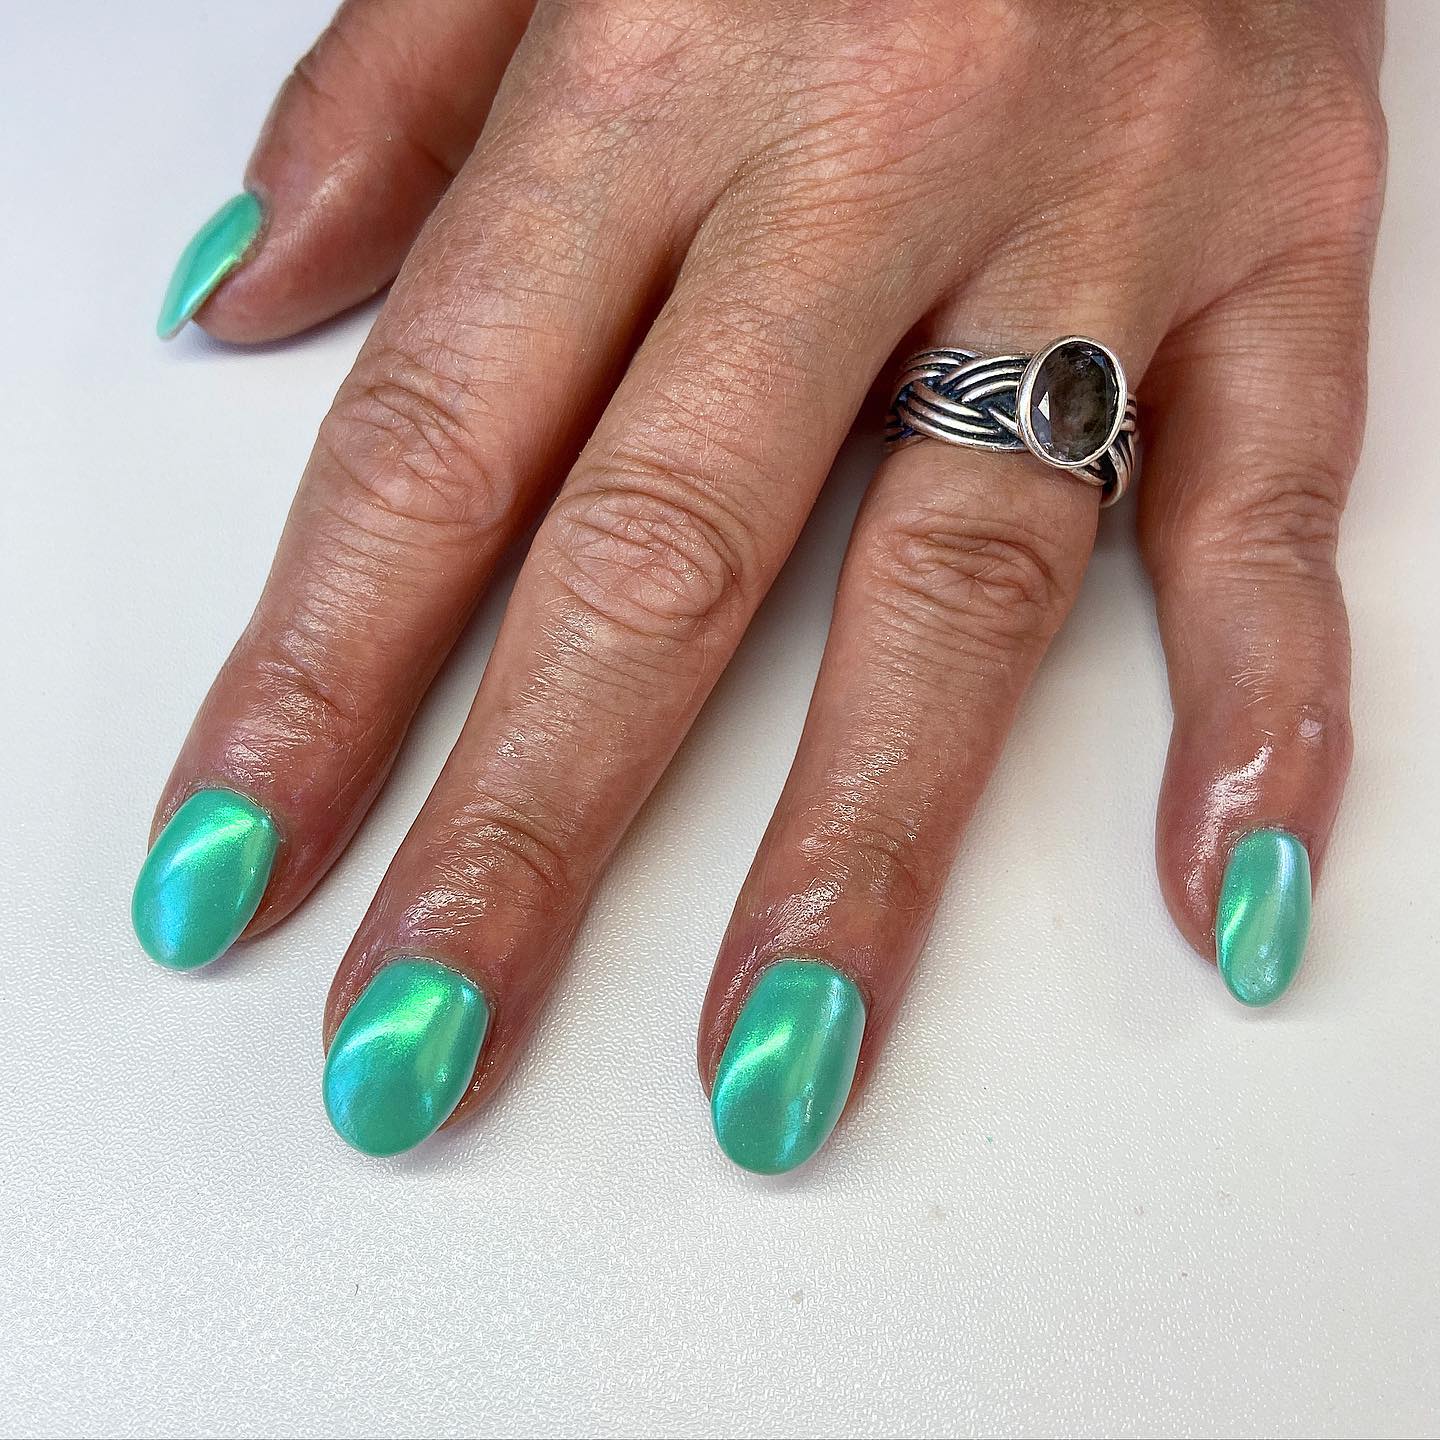 It is amazing how the iridescent powder gives the green nail polish a chrome effect. Go for it if you like this shade of green.